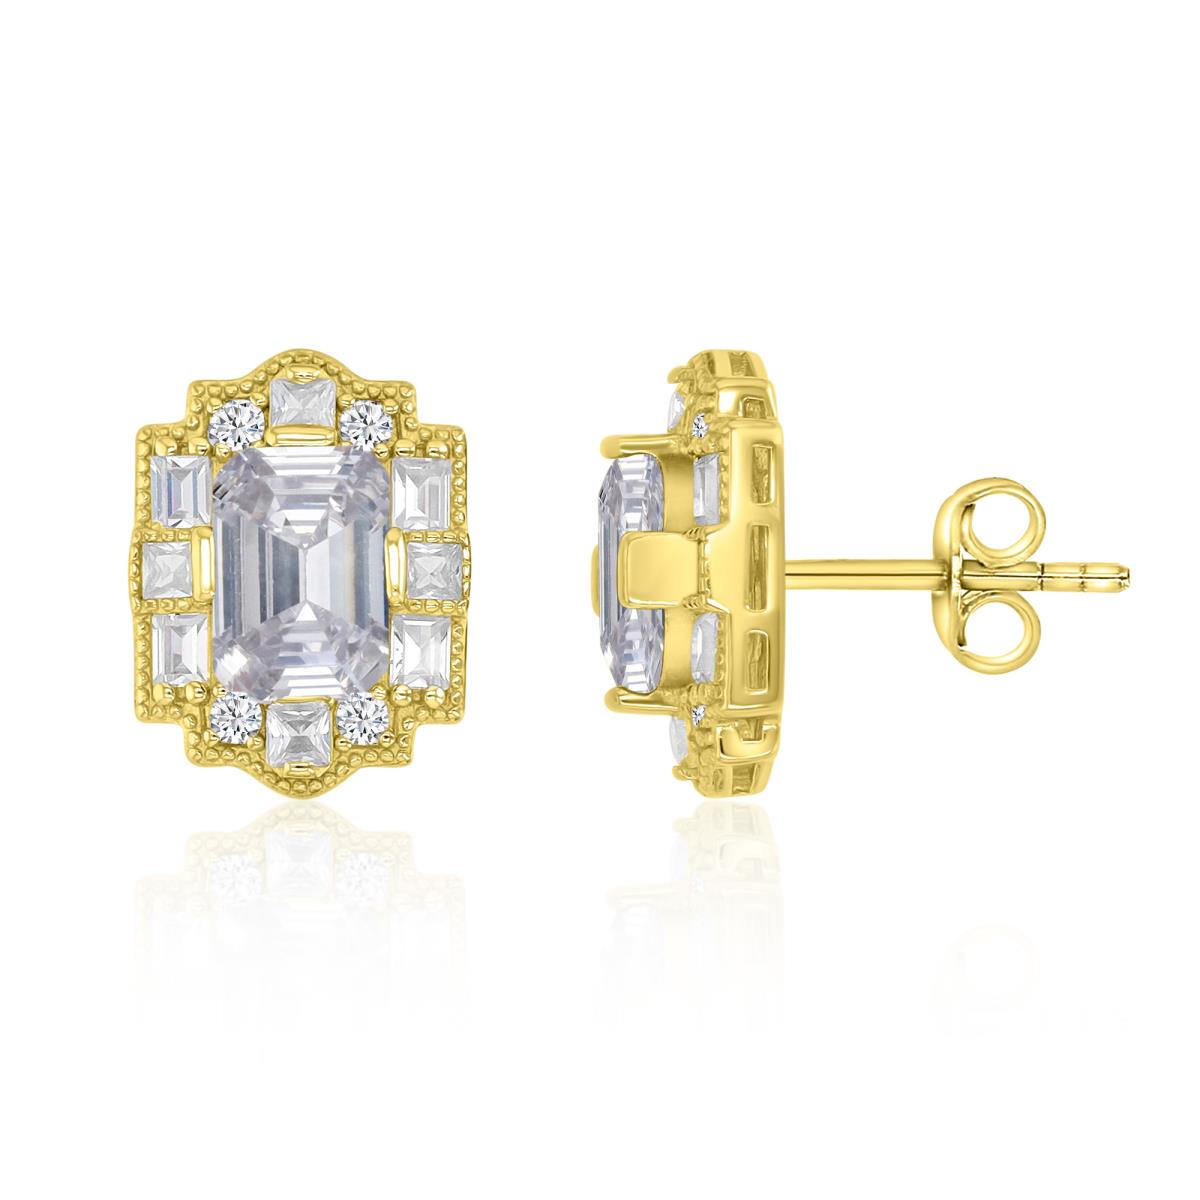 Sterling Silver Yellow 15X11.5MM Polished White CZ Vintage Emerald Cut Stud Earrings